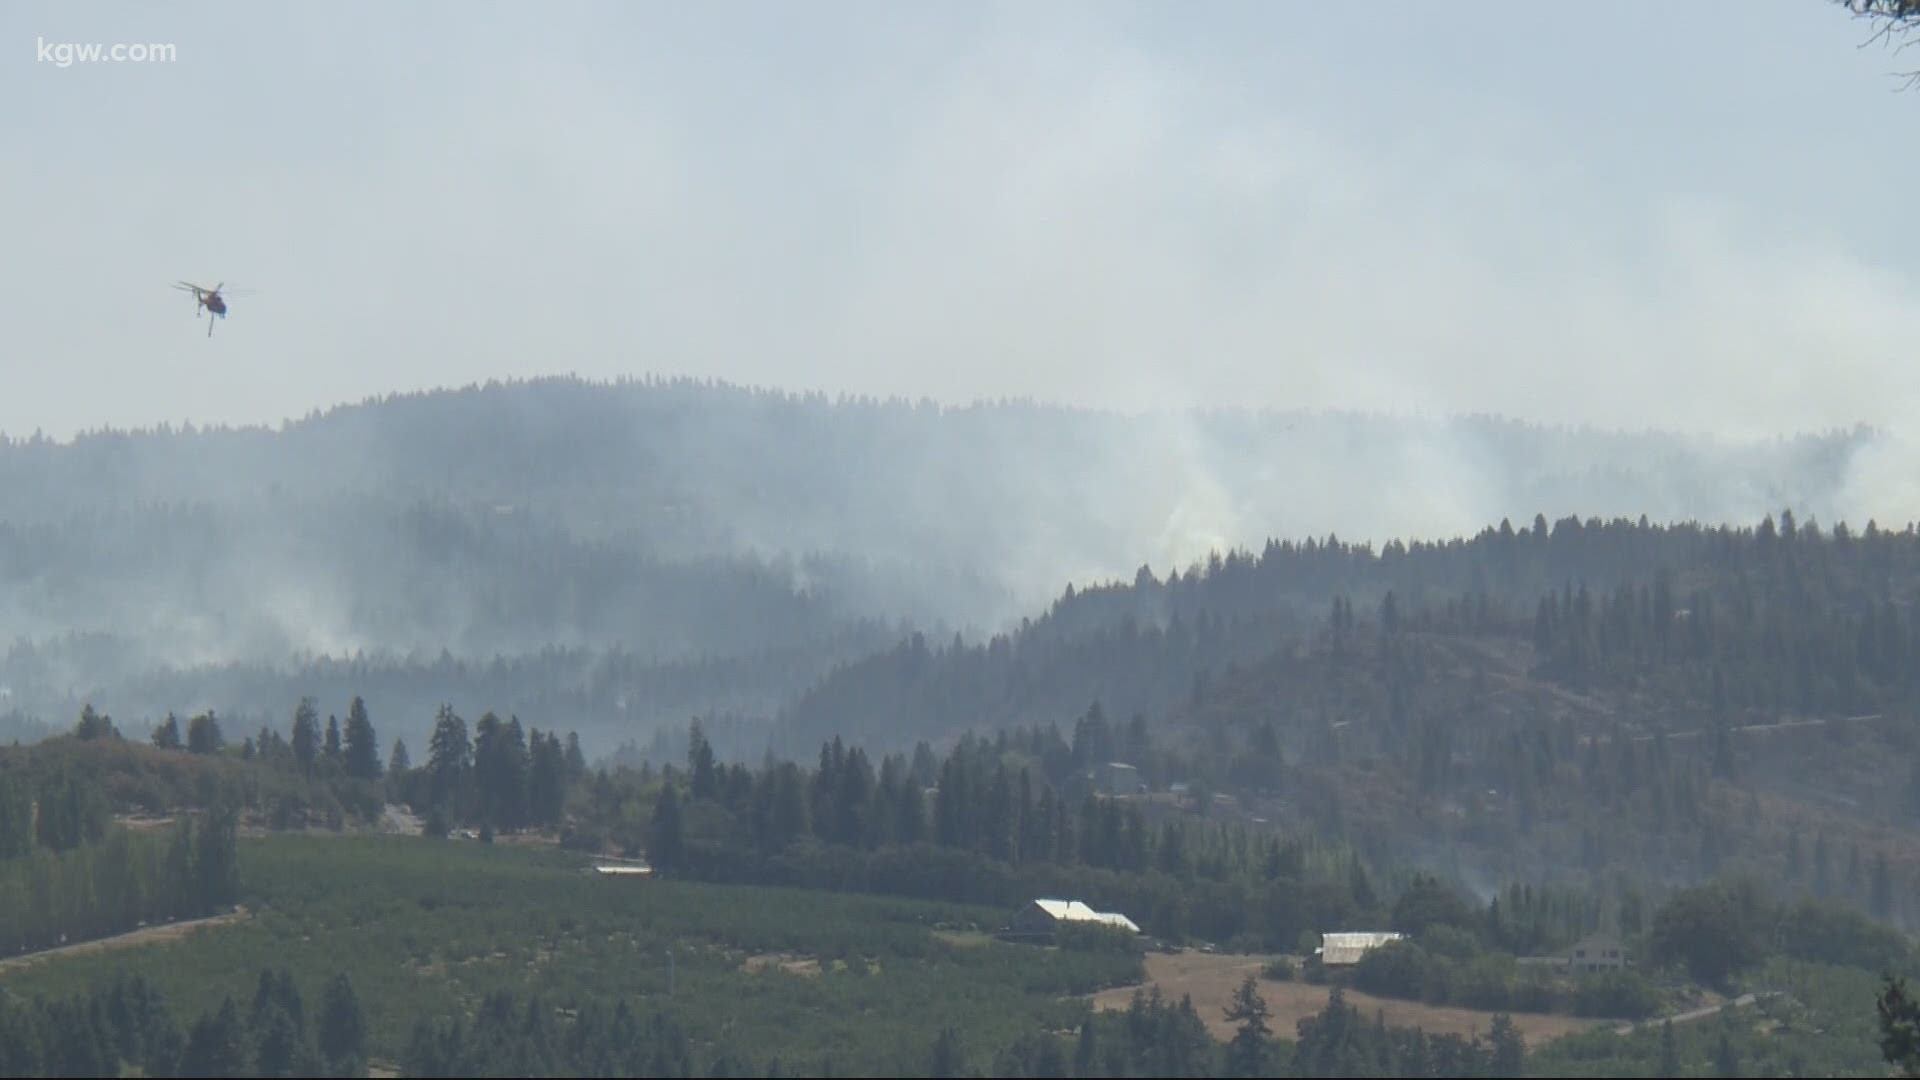 A wildfire has destroyed four structures near Mosier. The Mosier Creek Fire is roughly 5% contained and threatening hundreds of homes.